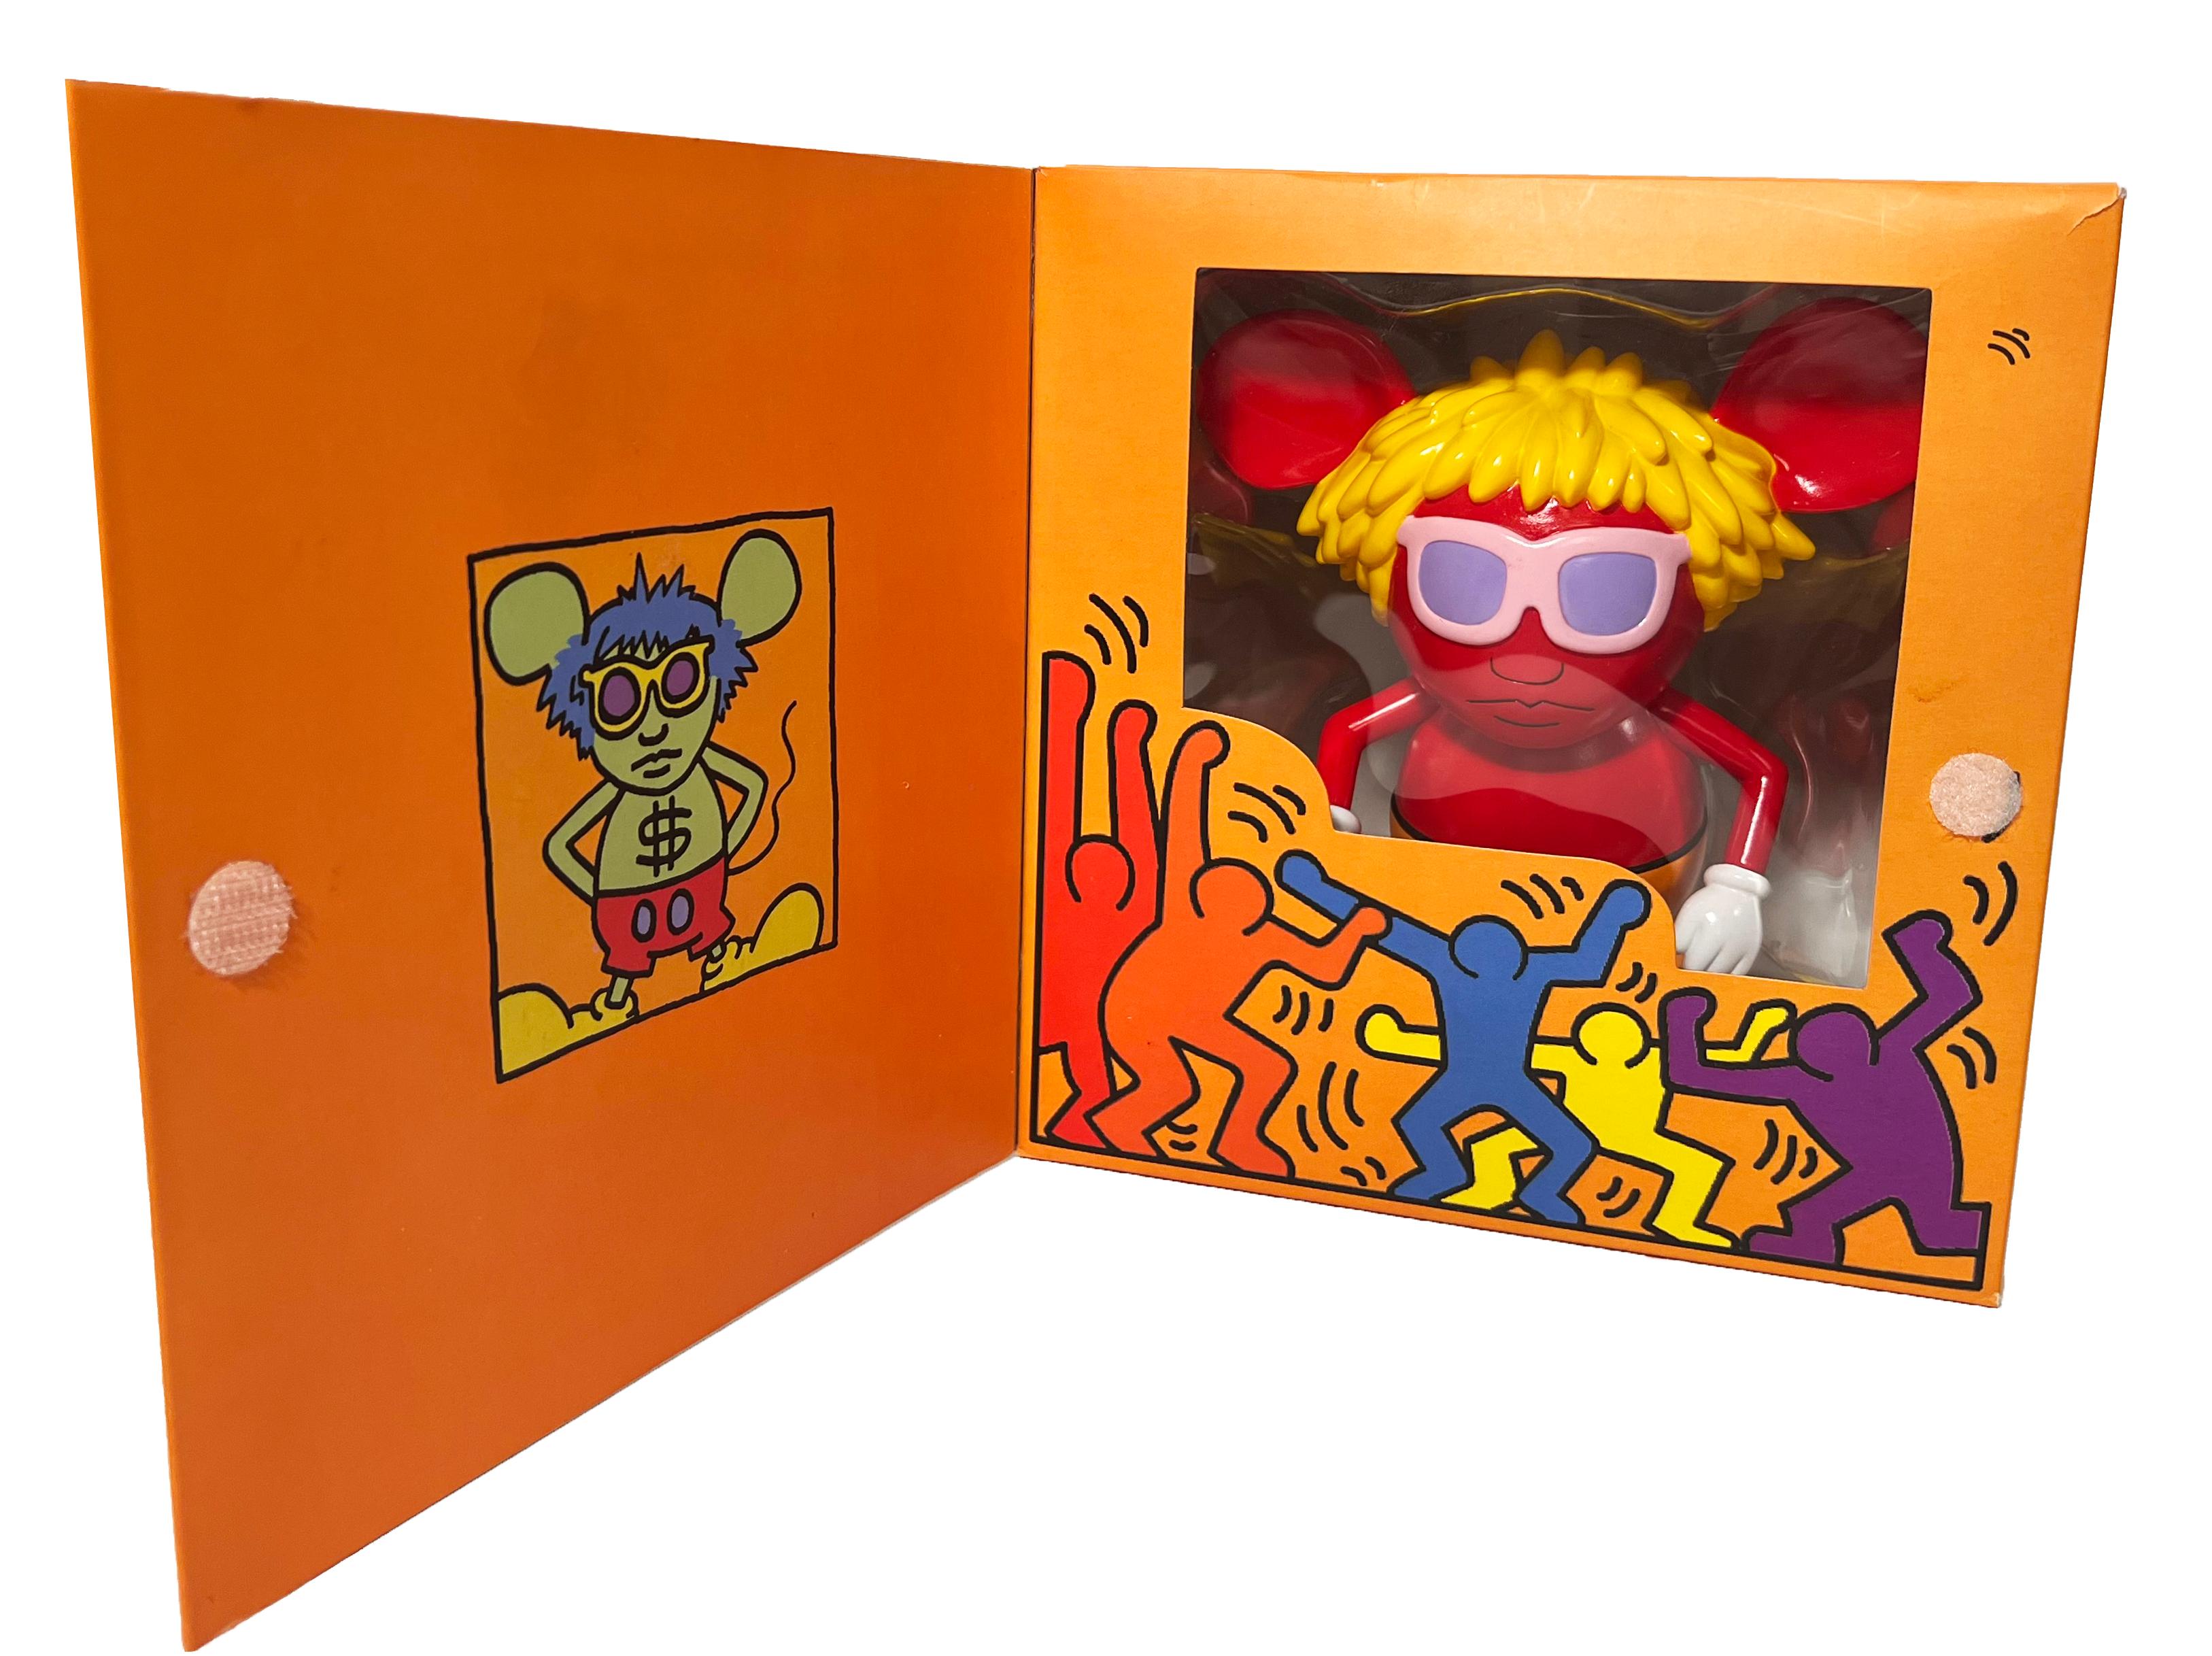 (after) Keith Haring Figurative Sculpture - Keith Haring Andy Mouse art toy (Keith Haring Andy Warhol)